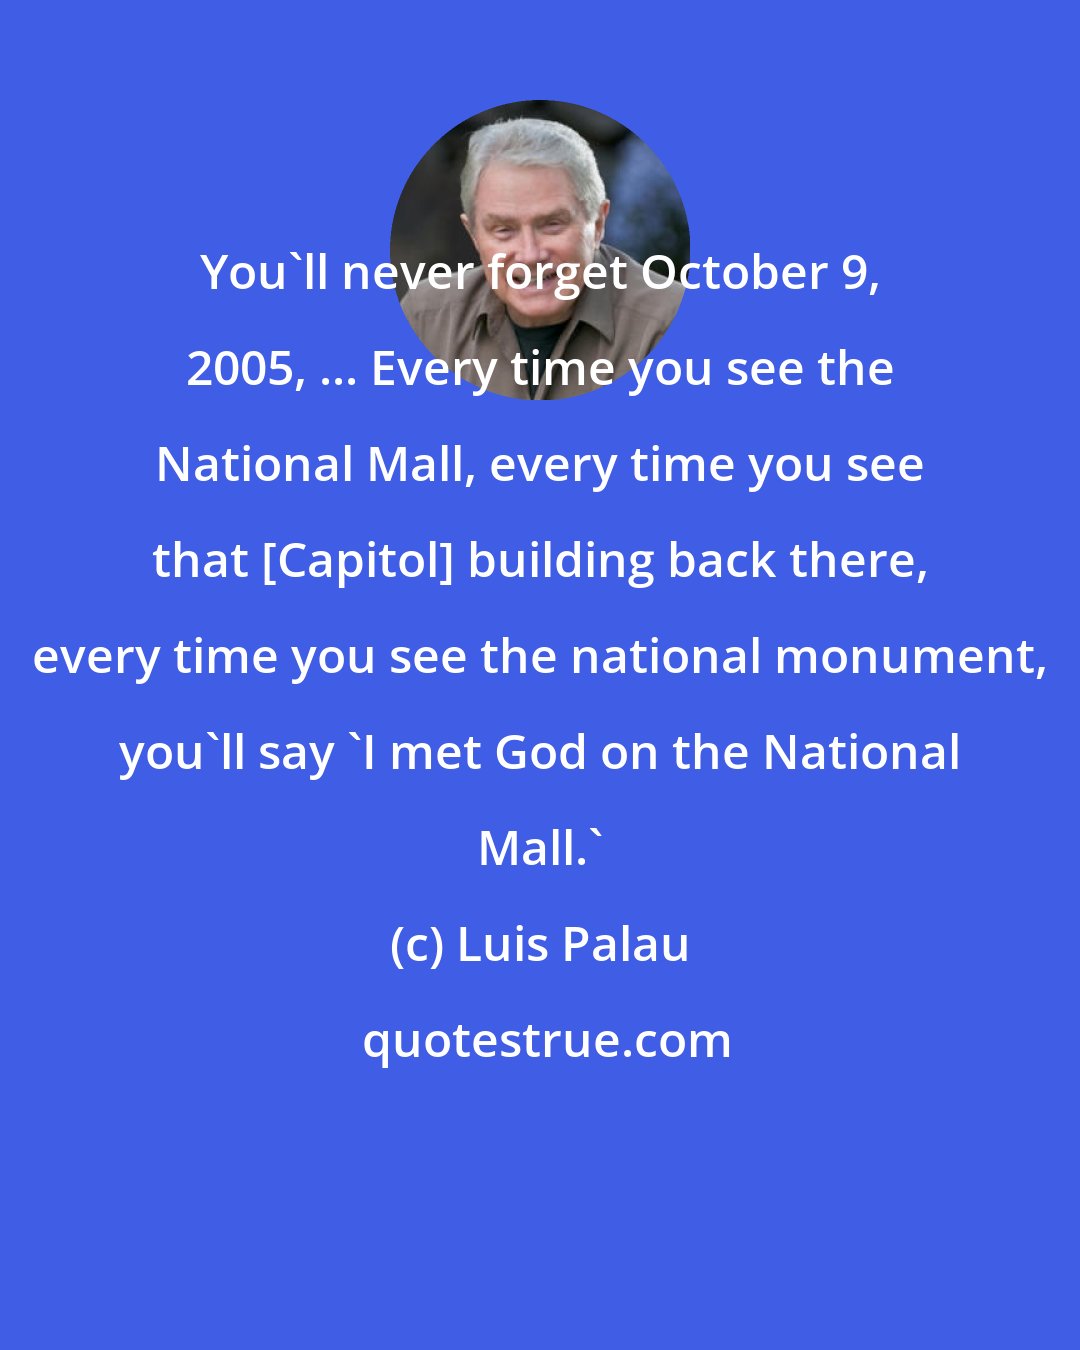 Luis Palau: You'll never forget October 9, 2005, ... Every time you see the National Mall, every time you see that [Capitol] building back there, every time you see the national monument, you'll say 'I met God on the National Mall.'